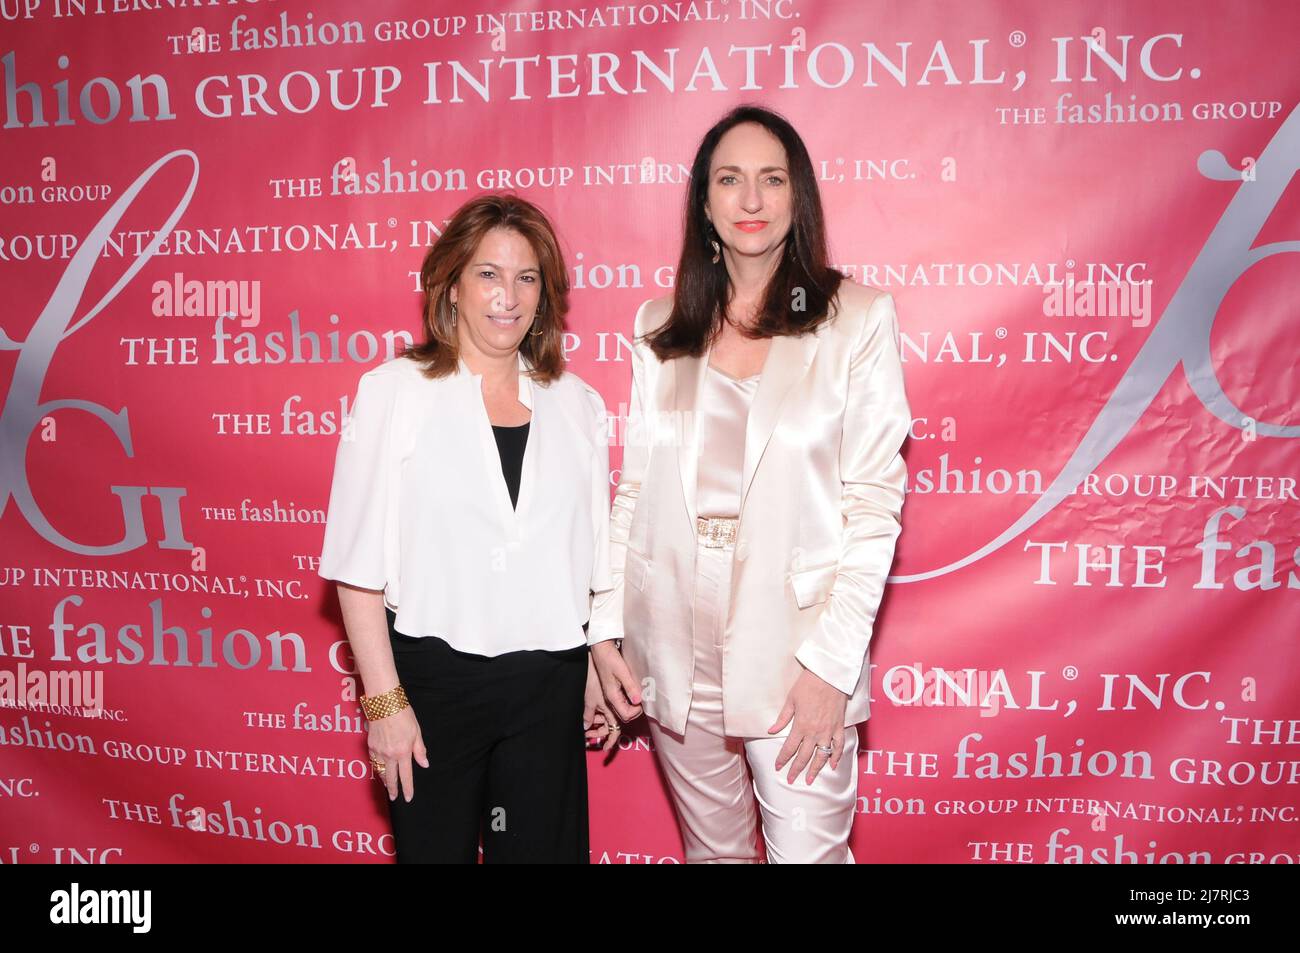 New York, United States. 10th May, 2022. Abby Wallach and Caroline Fabrigas attend the Fashion Group International Rising Star Awards held at the Lighthouse in New York City. (Photo by Efren Landaos/SOPA Images/Sipa USA) Credit: Sipa USA/Alamy Live News Stock Photo